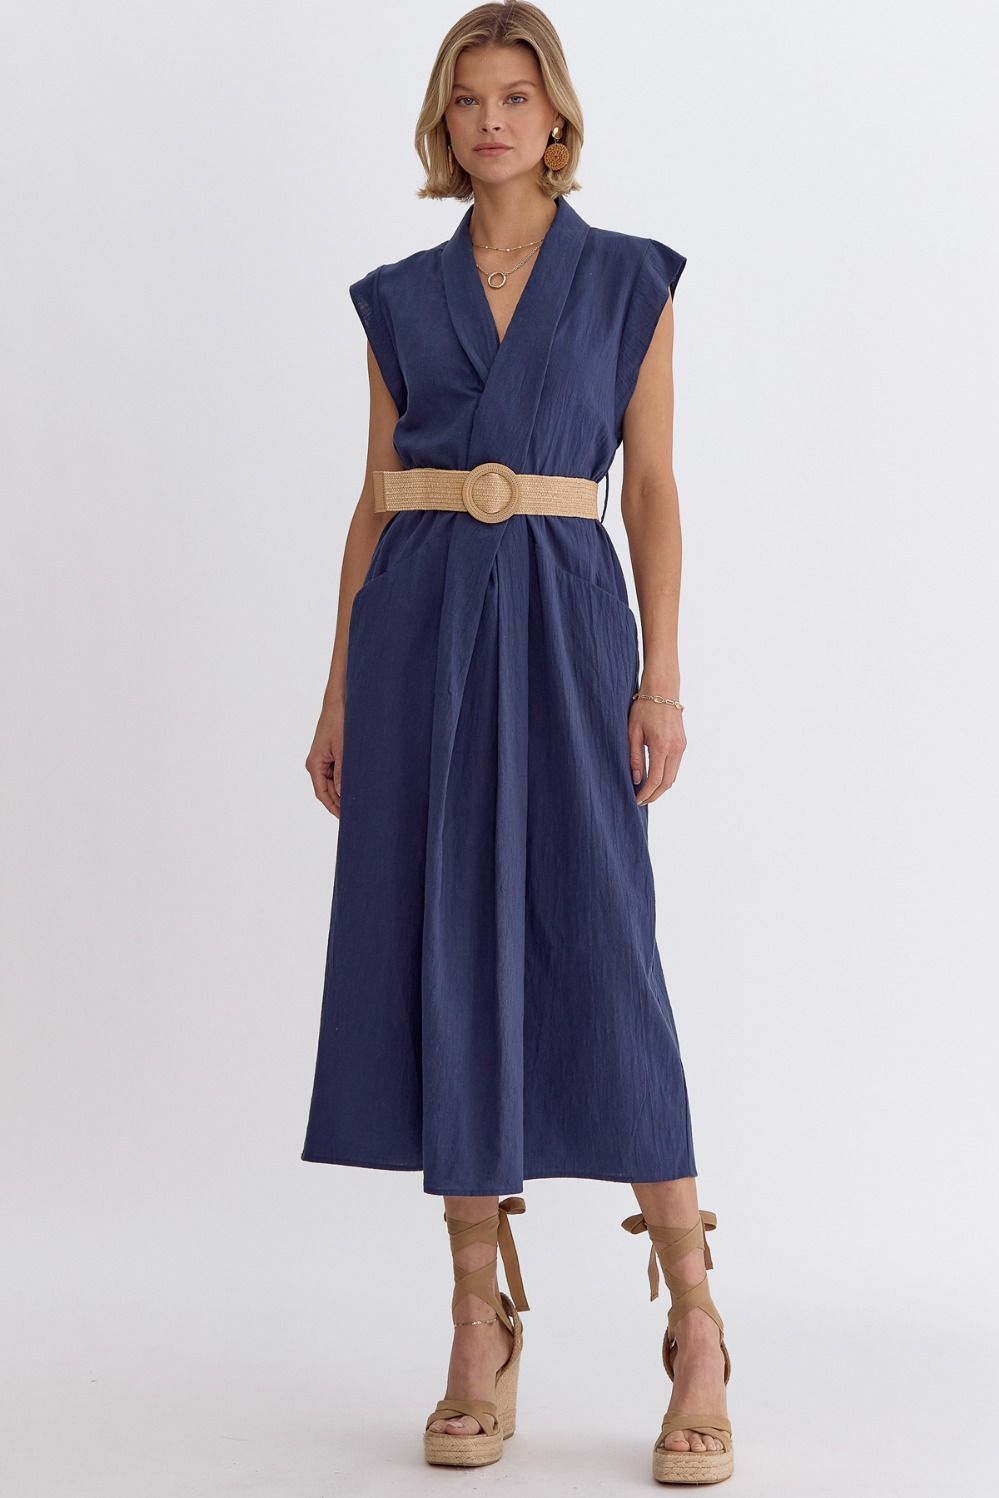 The Diana Navy Cotton Belted Midi Dress